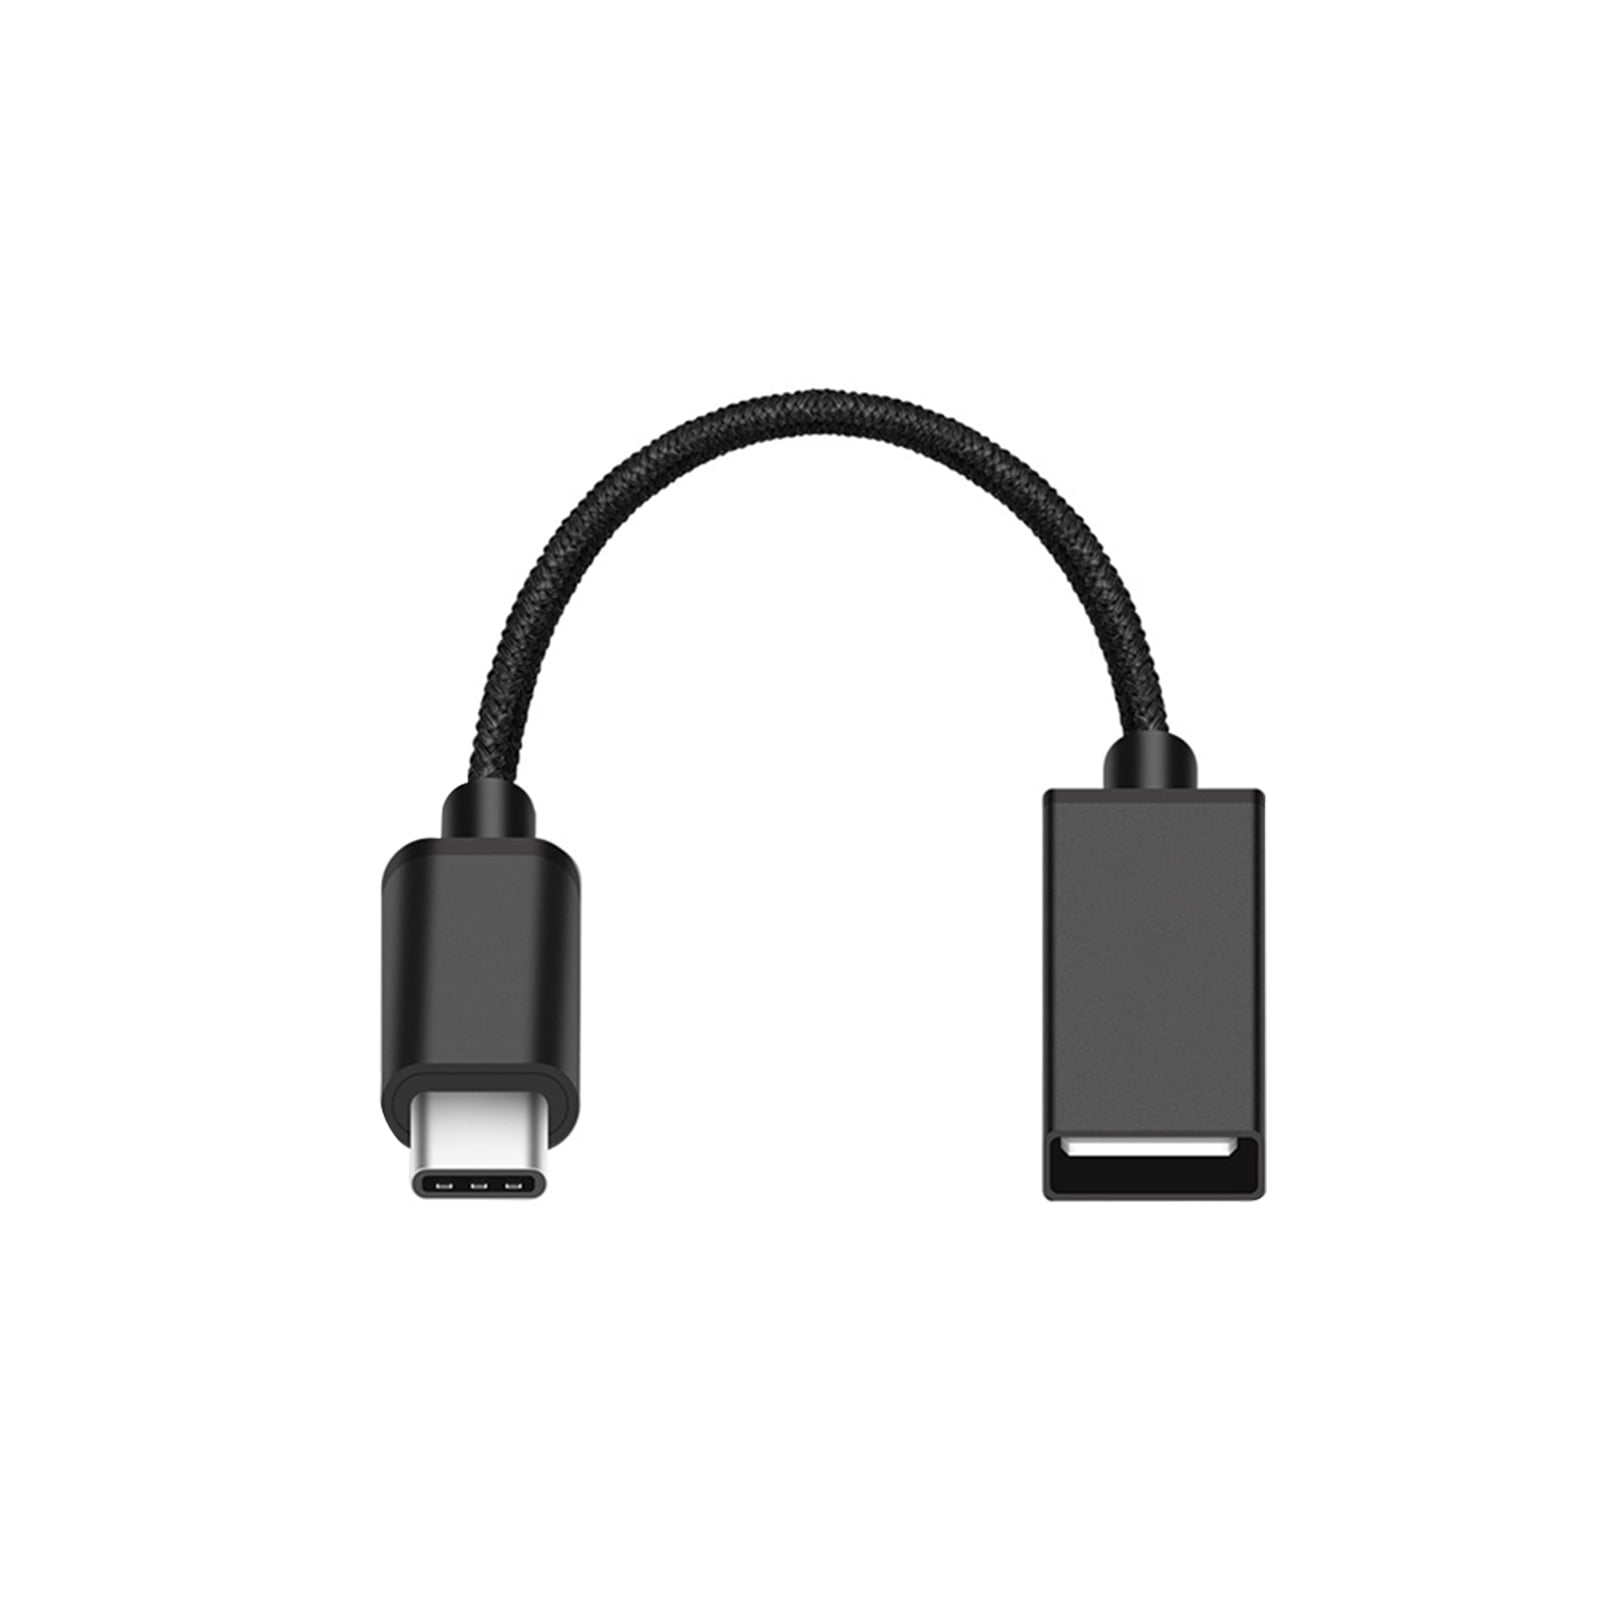 PRO OTG Cable Works for Sony Xperia Tablet Z Right Angle Cable Connects You to Any Compatible USB Device with MicroUSB 